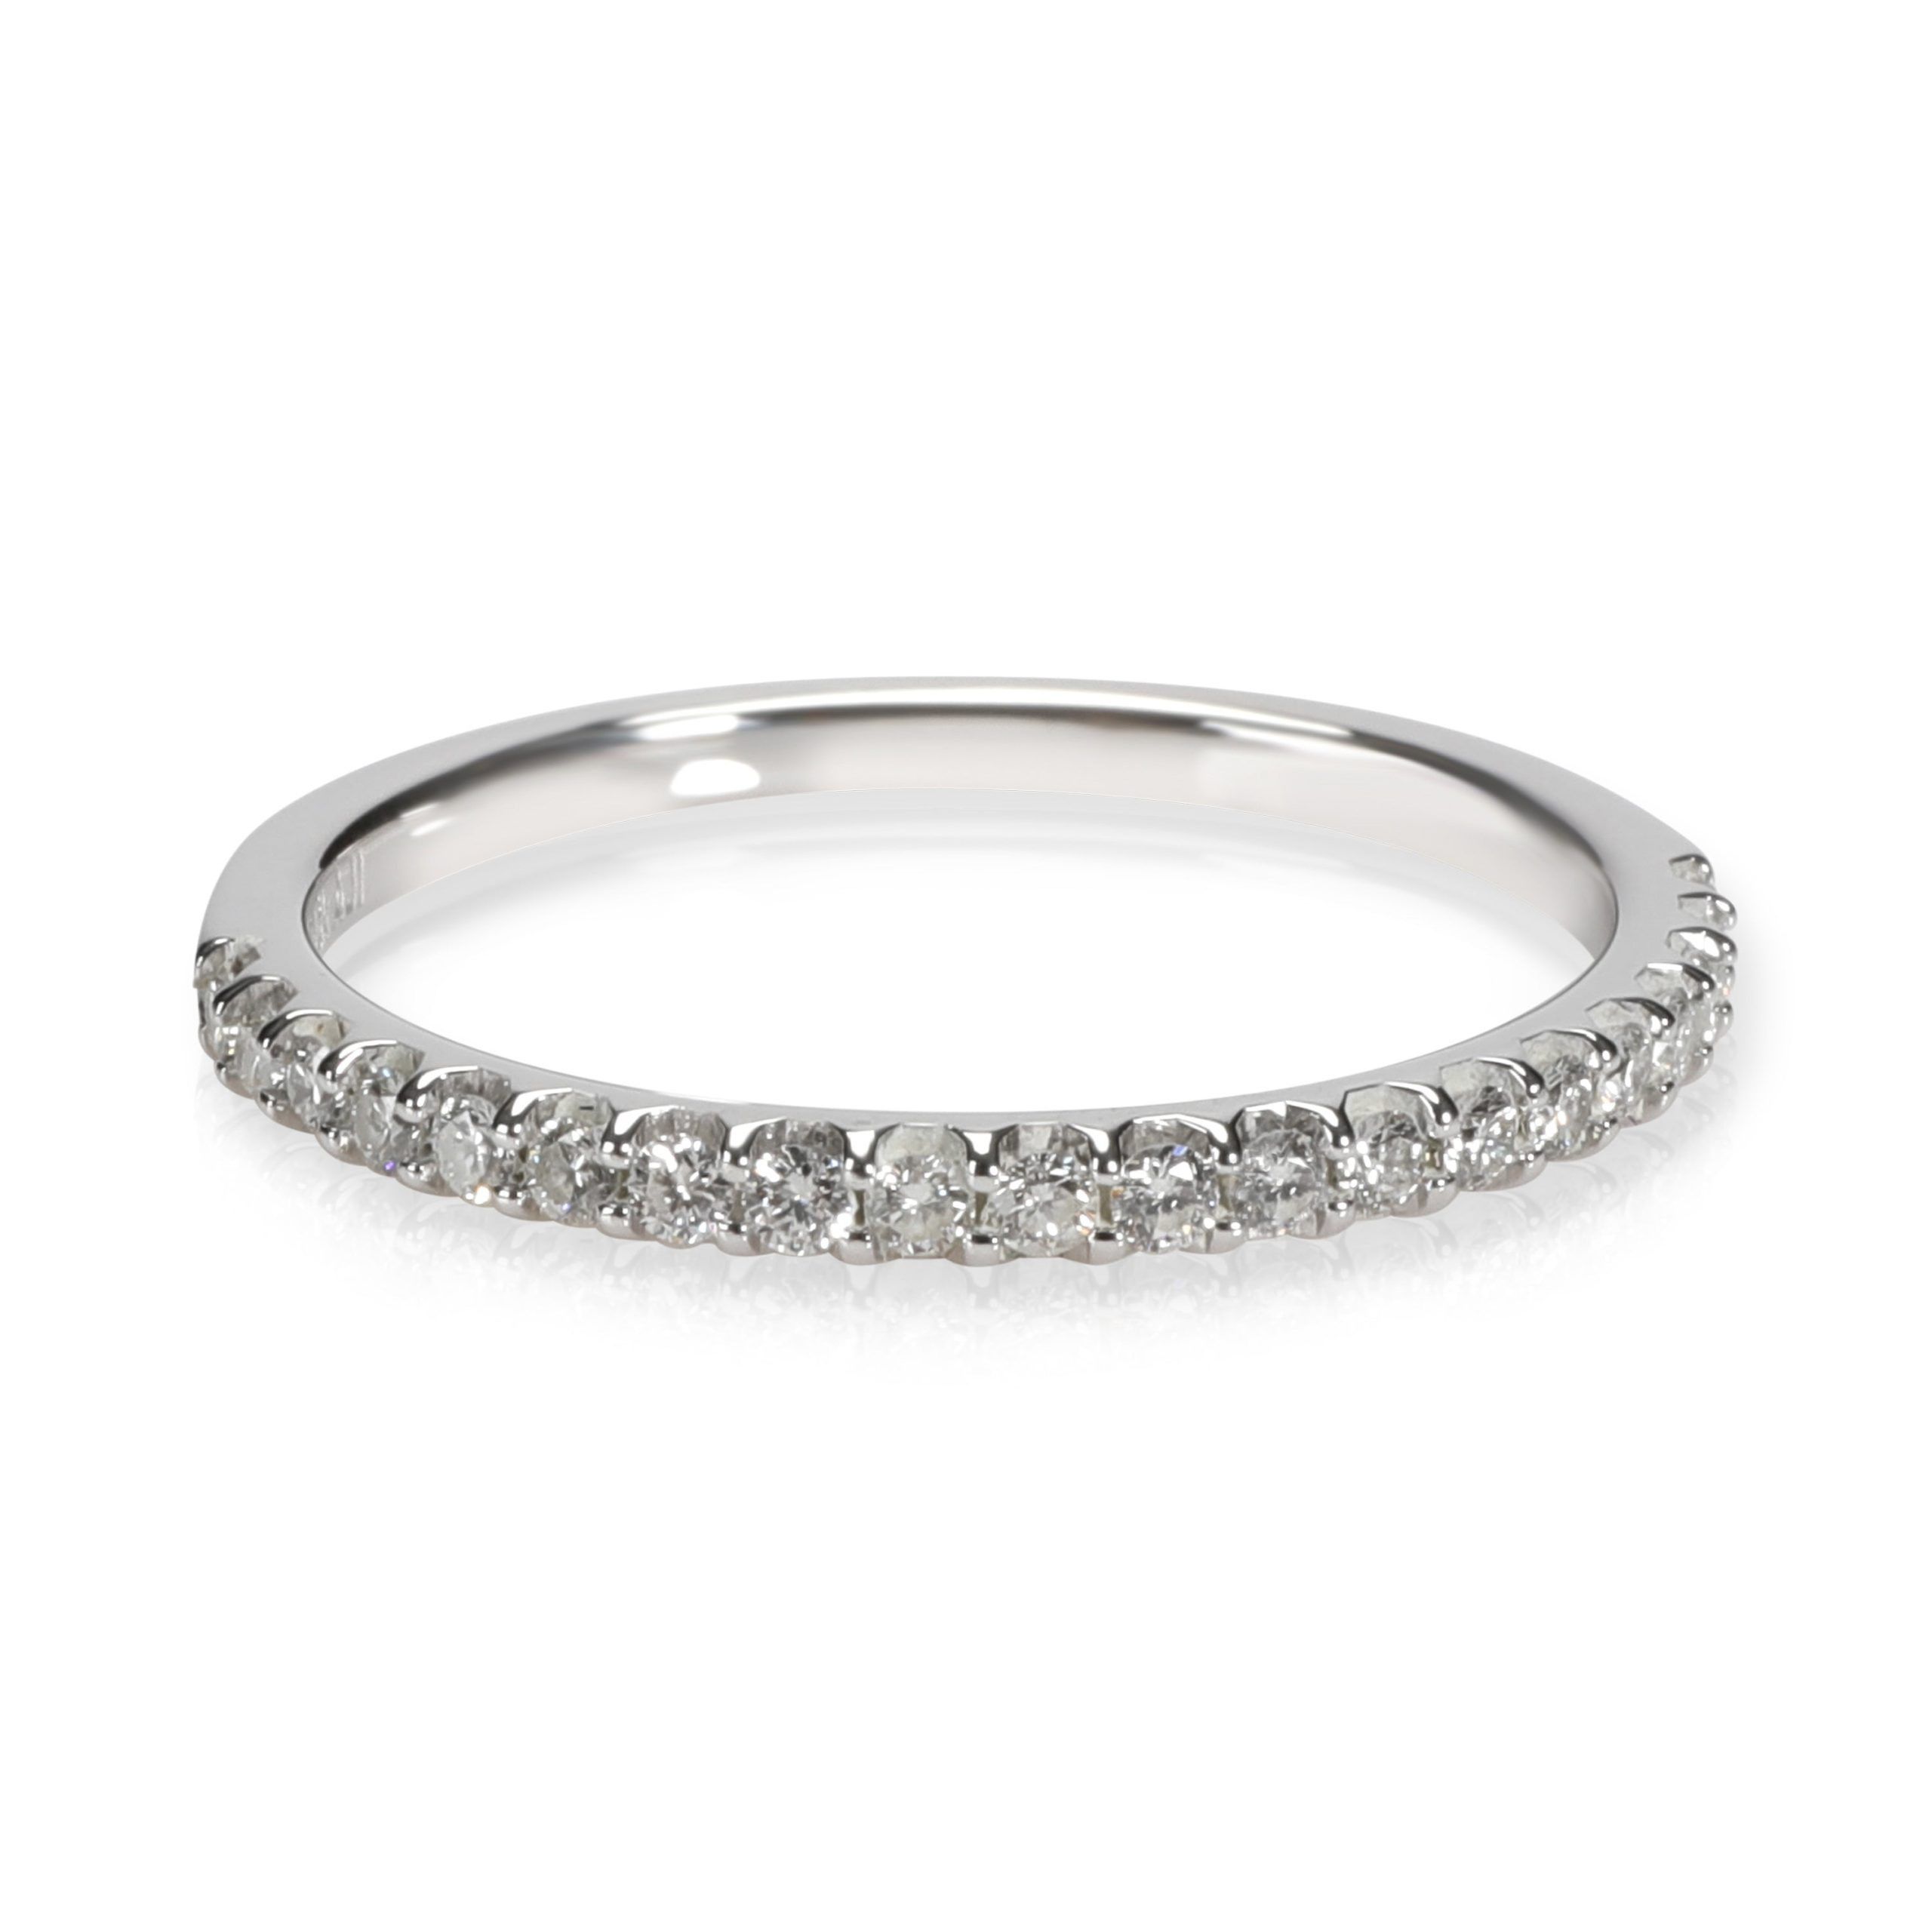 Tiffany & Co. Micro Pave Diamond Wedding Band in 14K White Gold 0.20 ...